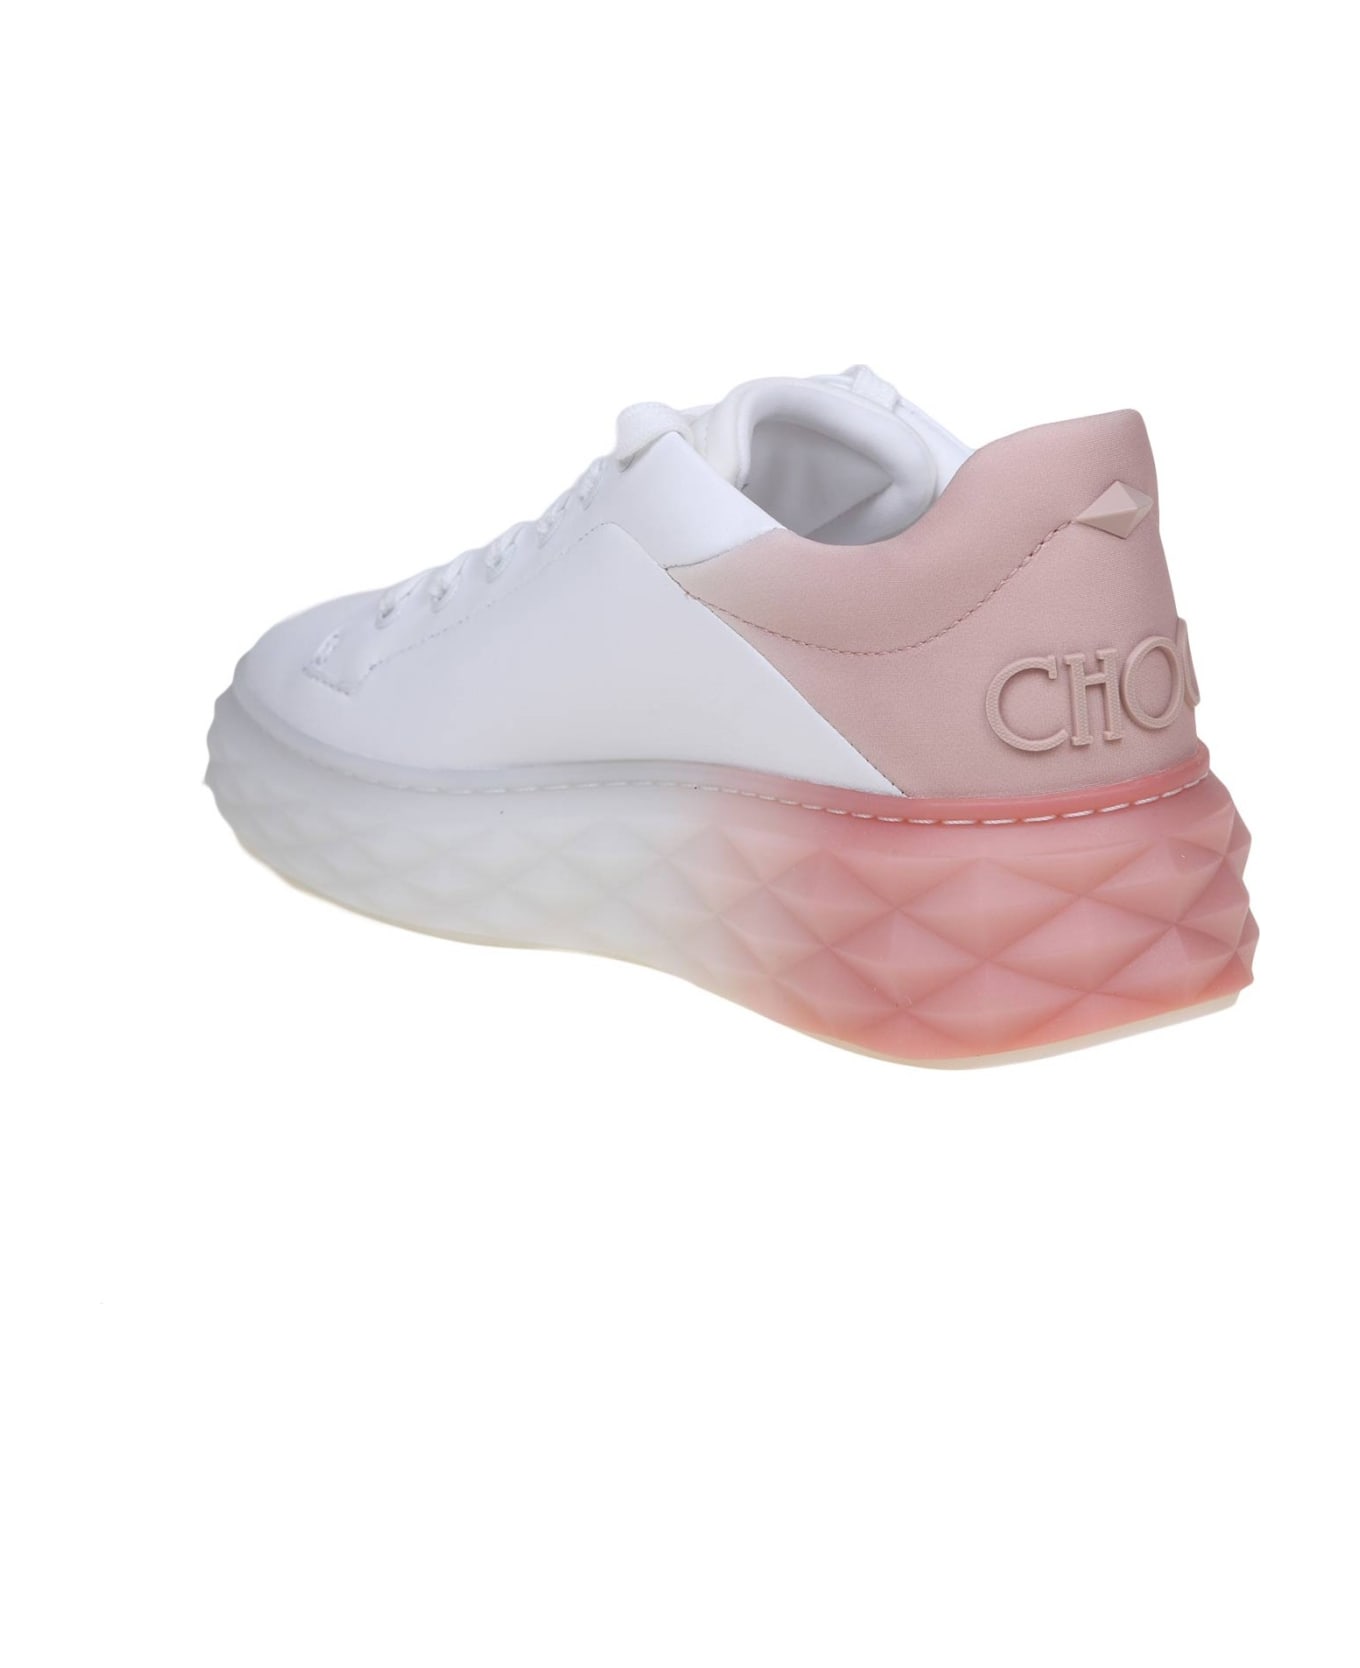 Jimmy Choo Diamond Maxi Sneakers In White And Pink Leather - White Black Mix ウェッジシューズ